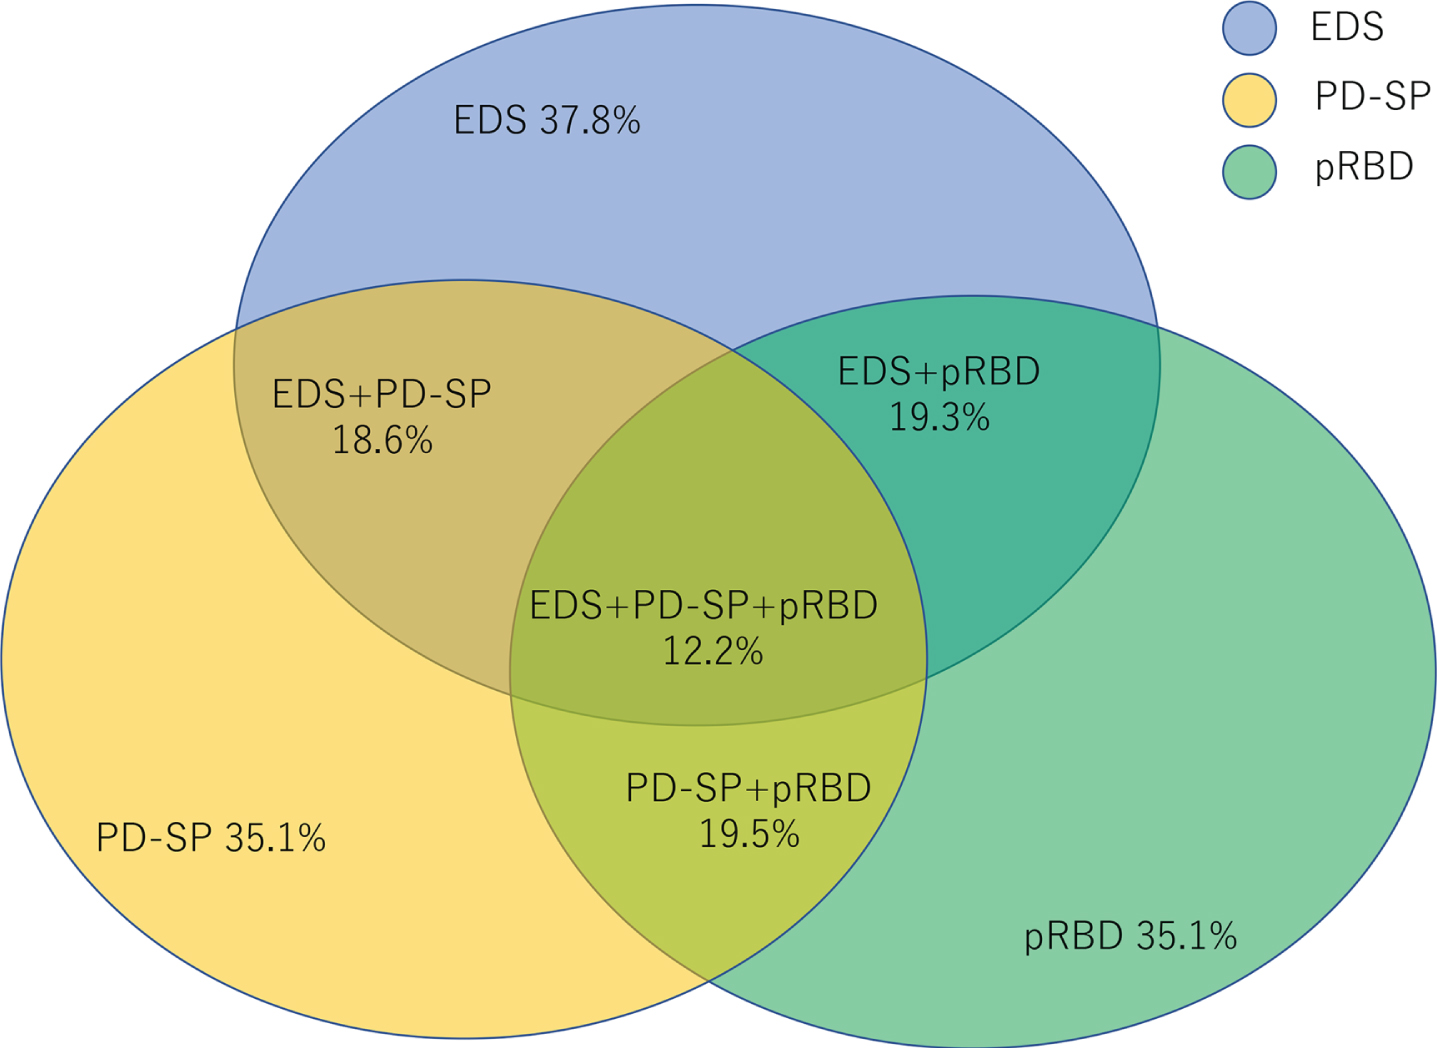 Prevalence and overlap of sleep-related symptoms in PD patients (reproduced from [13] with Creative Commons CC BY 4.0 license). EDS, excessive daytime sleepiness; PD-SP, PD-related sleep problems; pRBD, probable rapid eye movement sleep behavior disorder.